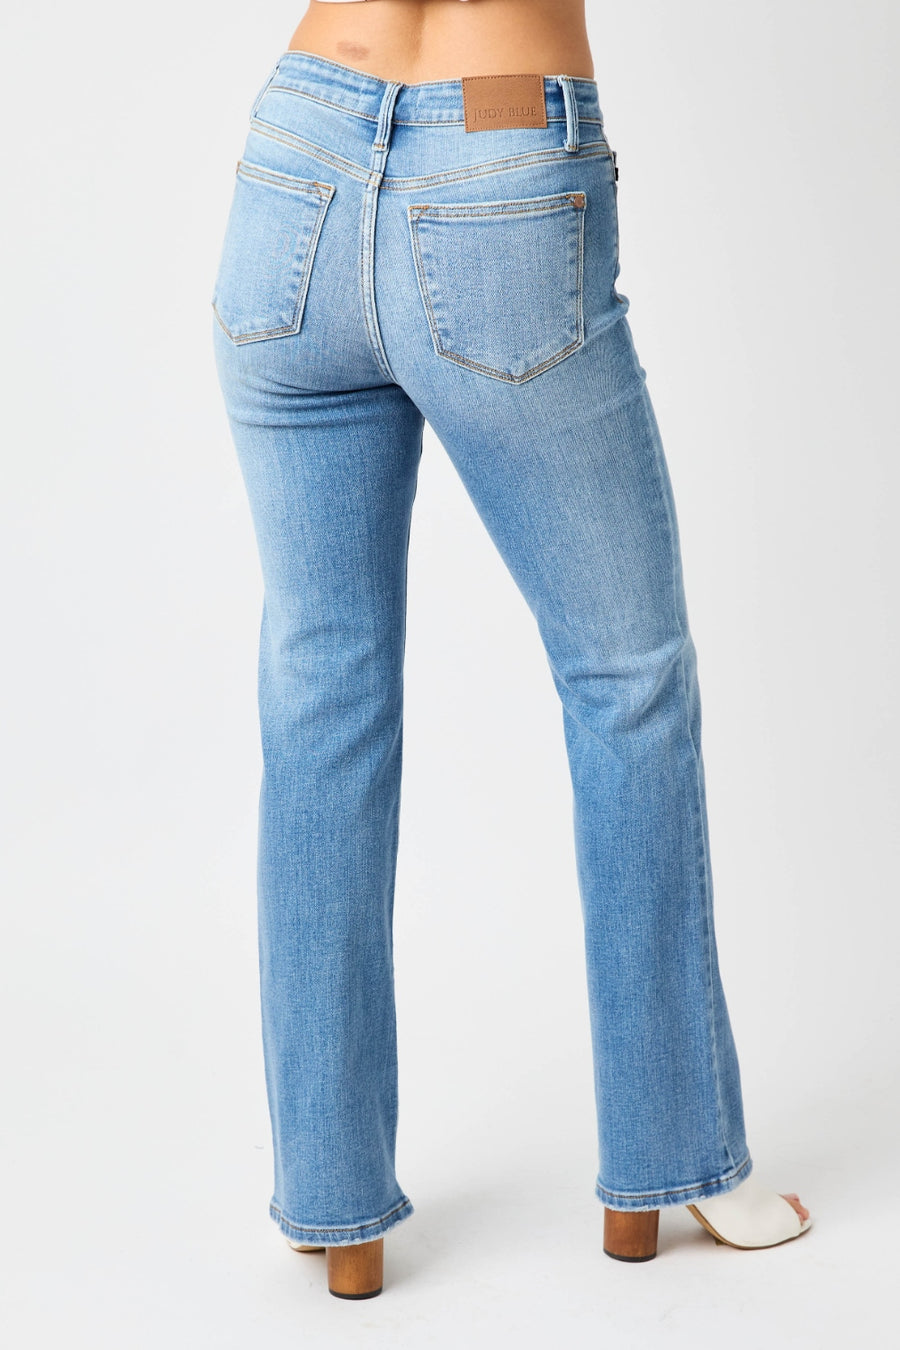 Amberly High Waist Straight Jeans by Judy Blue